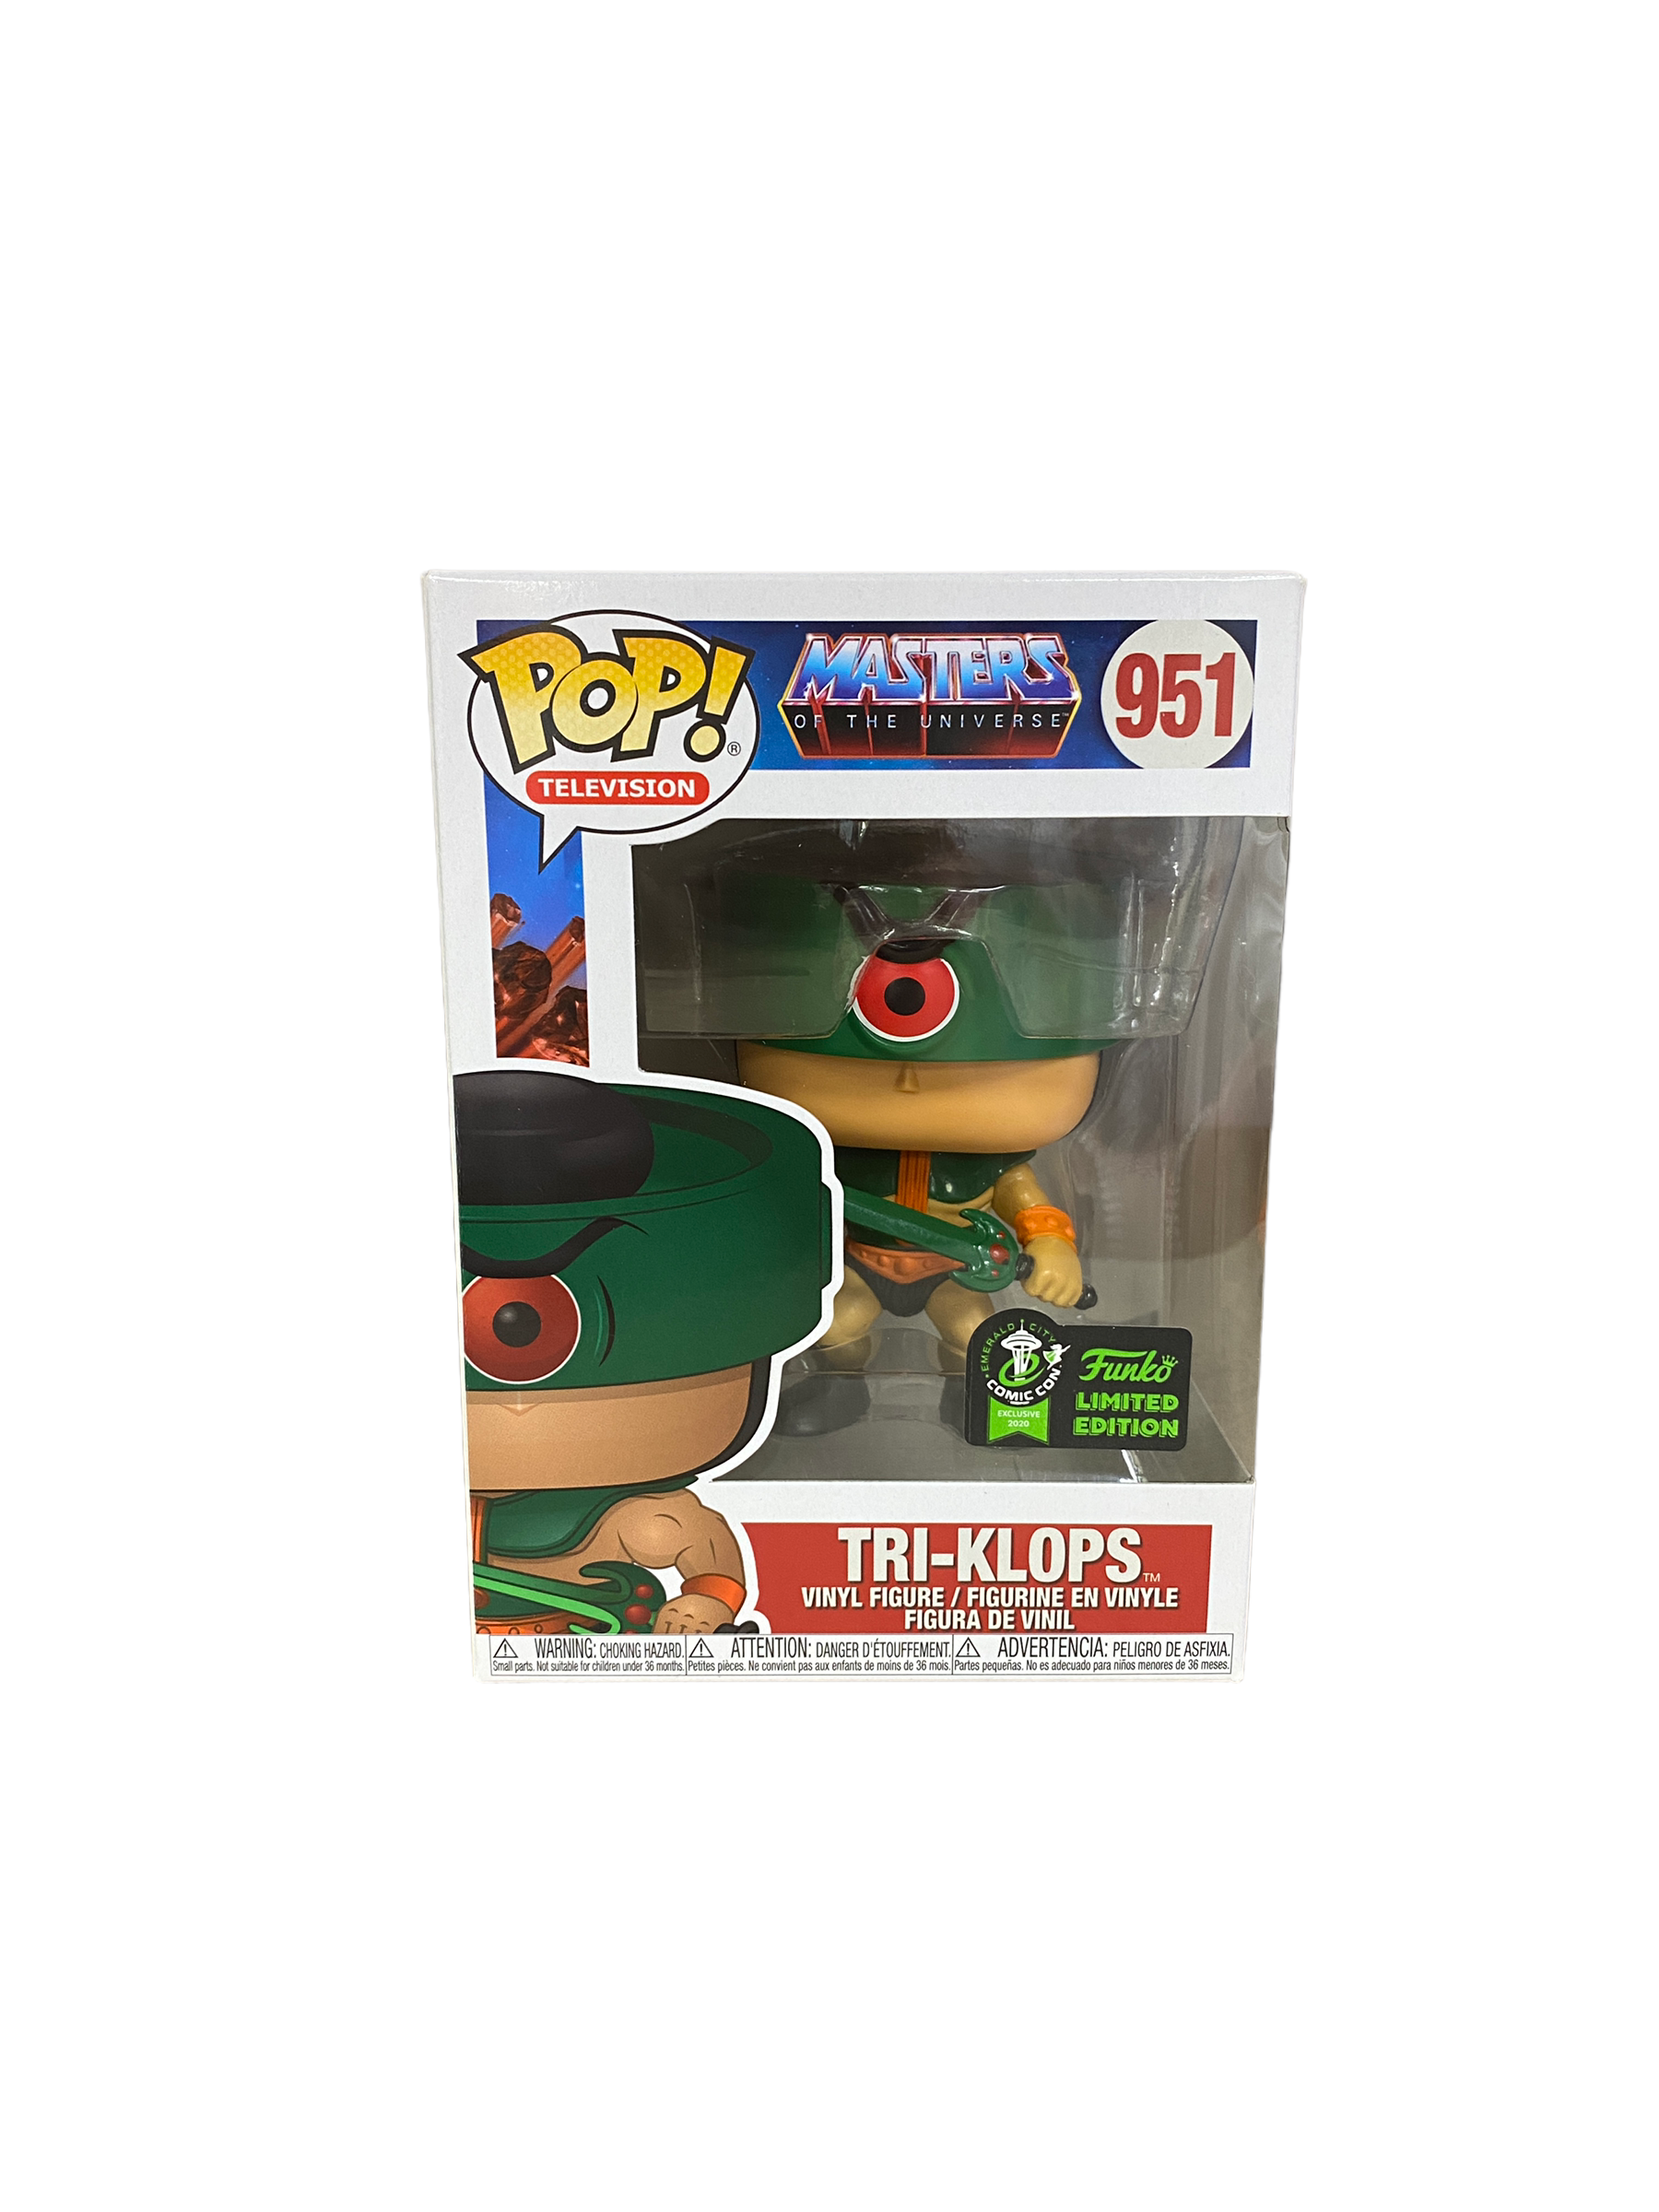 Tri-Klops #951 Funko Pop! - Masters Of The Universe - ECCC 2020 Official Convention Exclusive - Condition 9.5+/10